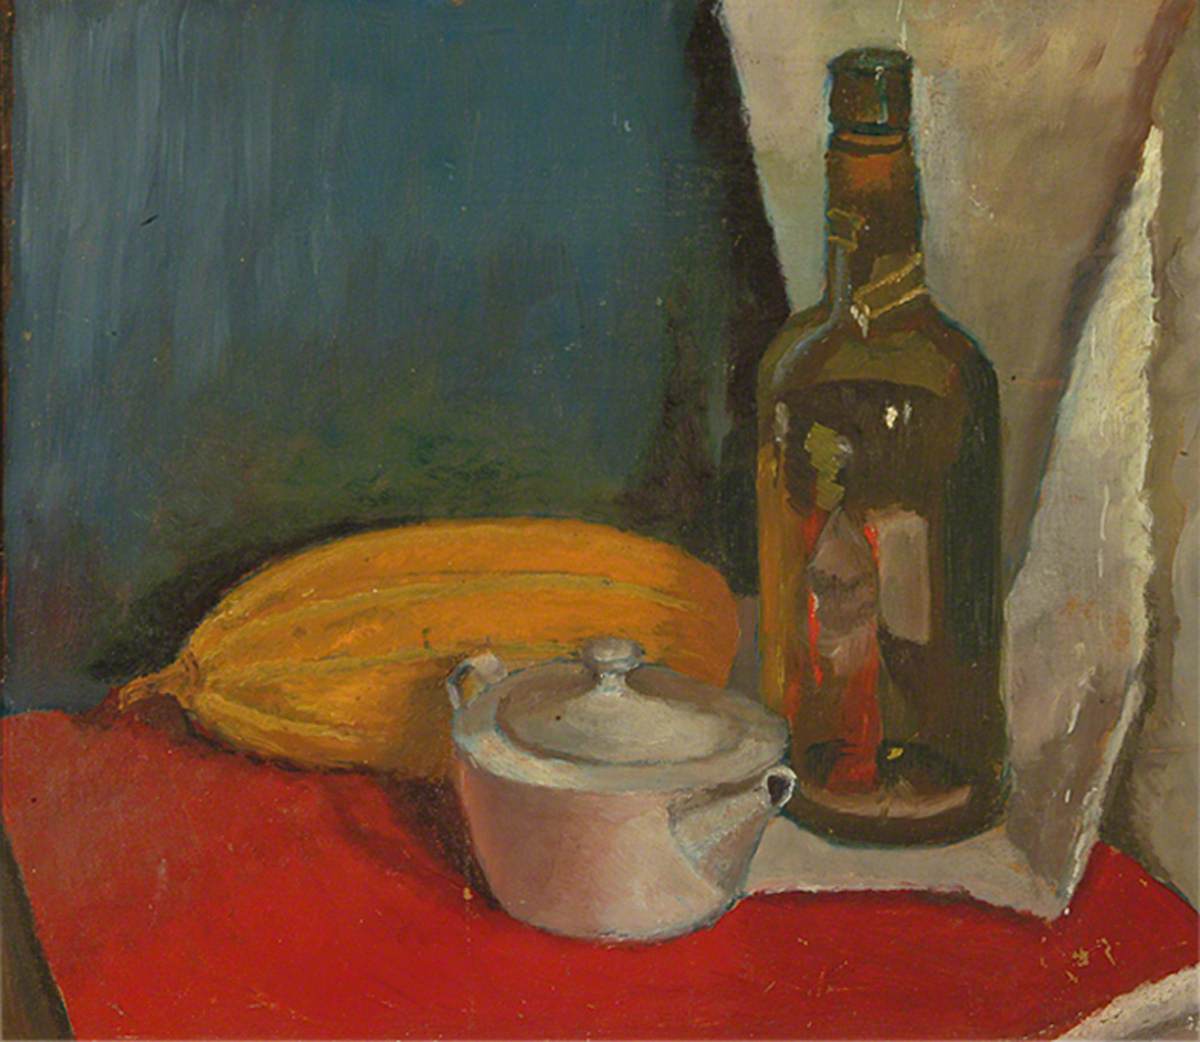 Still Life with a Bottle, a Melon and a Teapot